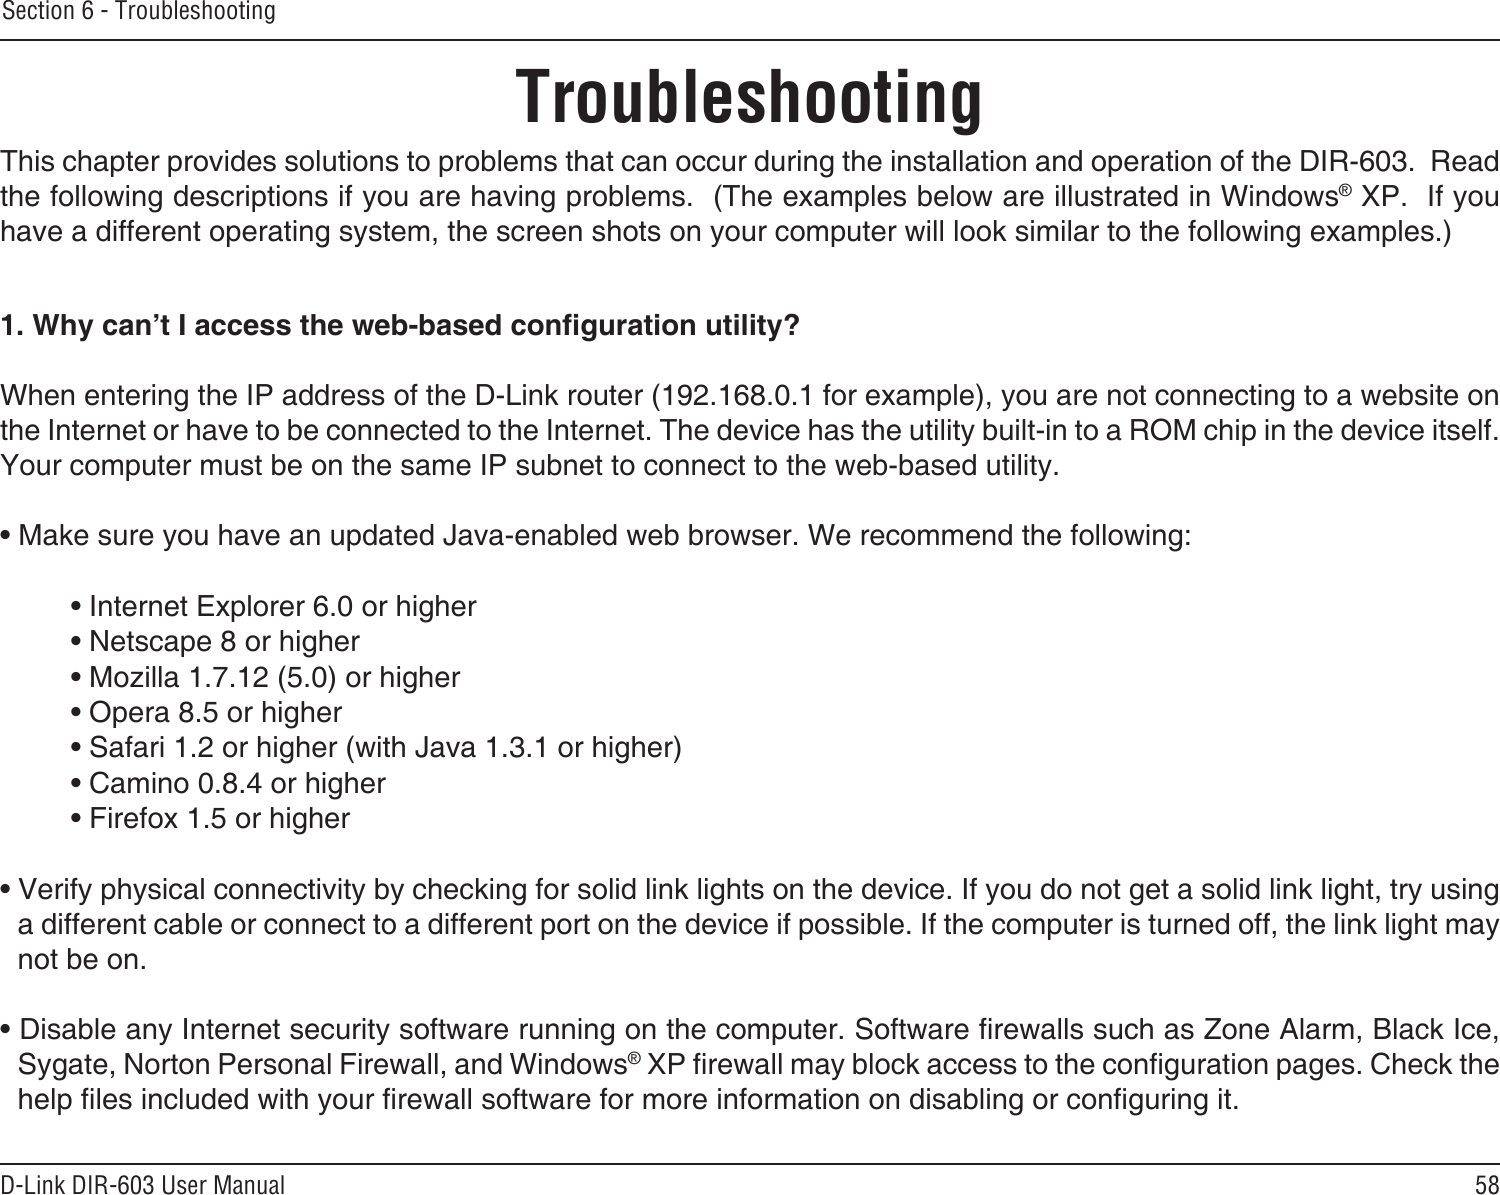 58D-Link DIR-603 User ManualSection 6 - TroubleshootingTroubleshootingThis chapter provides solutions to problems that can occur during the installation and operation of the DIR-603.  Read the following descriptions if you are having problems.  (The examples below are illustrated in Windows® XP.  If you have a different operating system, the screen shots on your computer will look similar to the following examples.)1. Why can’t I access the web-based conguration utility?When entering the IP address of the D-Link router (192.168.0.1 for example), you are not connecting to a website on the Internet or have to be connected to the Internet. The device has the utility built-in to a ROM chip in the device itself. Your computer must be on the same IP subnet to connect to the web-based utility. • Make sure you have an updated Java-enabled web browser. We recommend the following: • Internet Explorer 6.0 or higher • Netscape 8 or higher • Mozilla 1.7.12 (5.0) or higher • Opera 8.5 or higher • Safari 1.2 or higher (with Java 1.3.1 or higher) • Camino 0.8.4 or higher • Firefox 1.5 or higher • Verify physical connectivity by checking for solid link lights on the device. If you do not get a solid link light, try using a different cable or connect to a different port on the device if possible. If the computer is turned off, the link light may not be on.• Disable any Internet security software running on the computer. Software rewalls such as Zone Alarm, Black Ice, Sygate, Norton Personal Firewall, and Windows® XP rewall may block access to the conguration pages. Check the help les included with your rewall software for more information on disabling or conguring it.